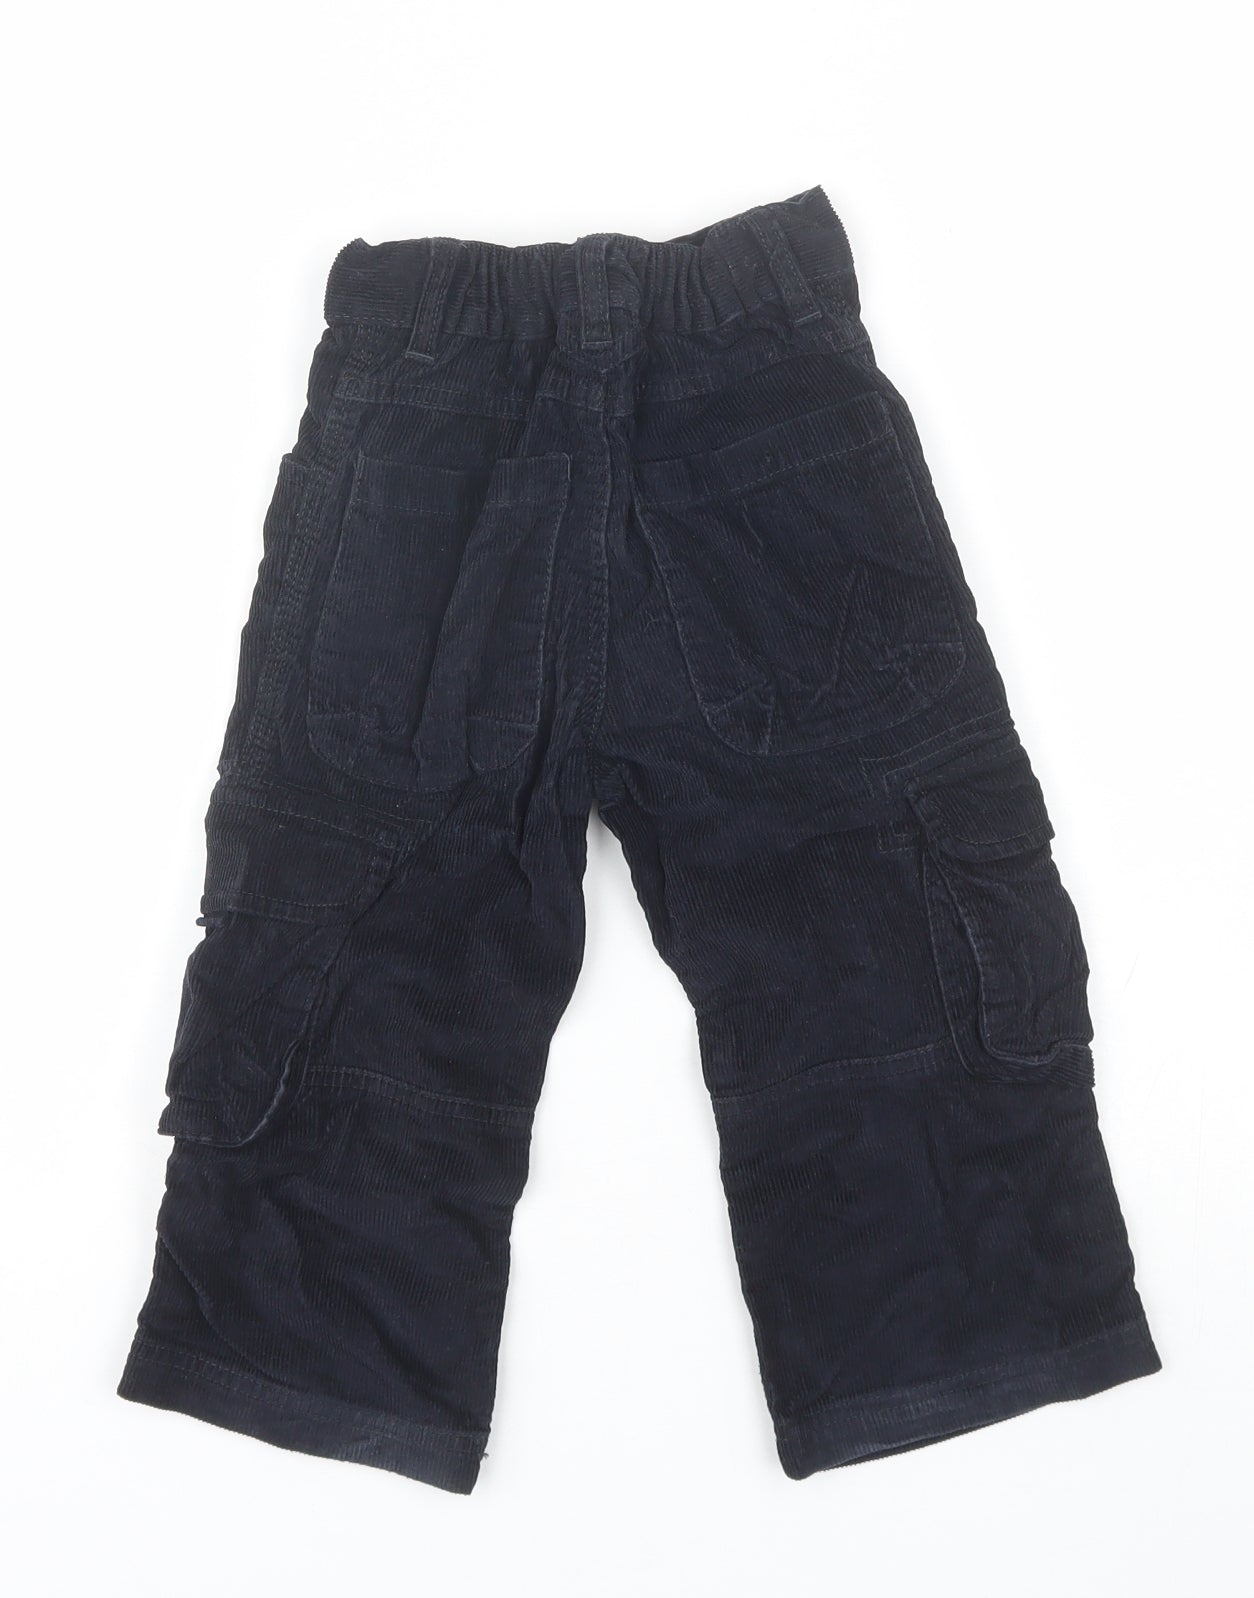 Blue Zoo Boys Blue  Cotton Cargo Trousers Size 2-3 Years  Regular